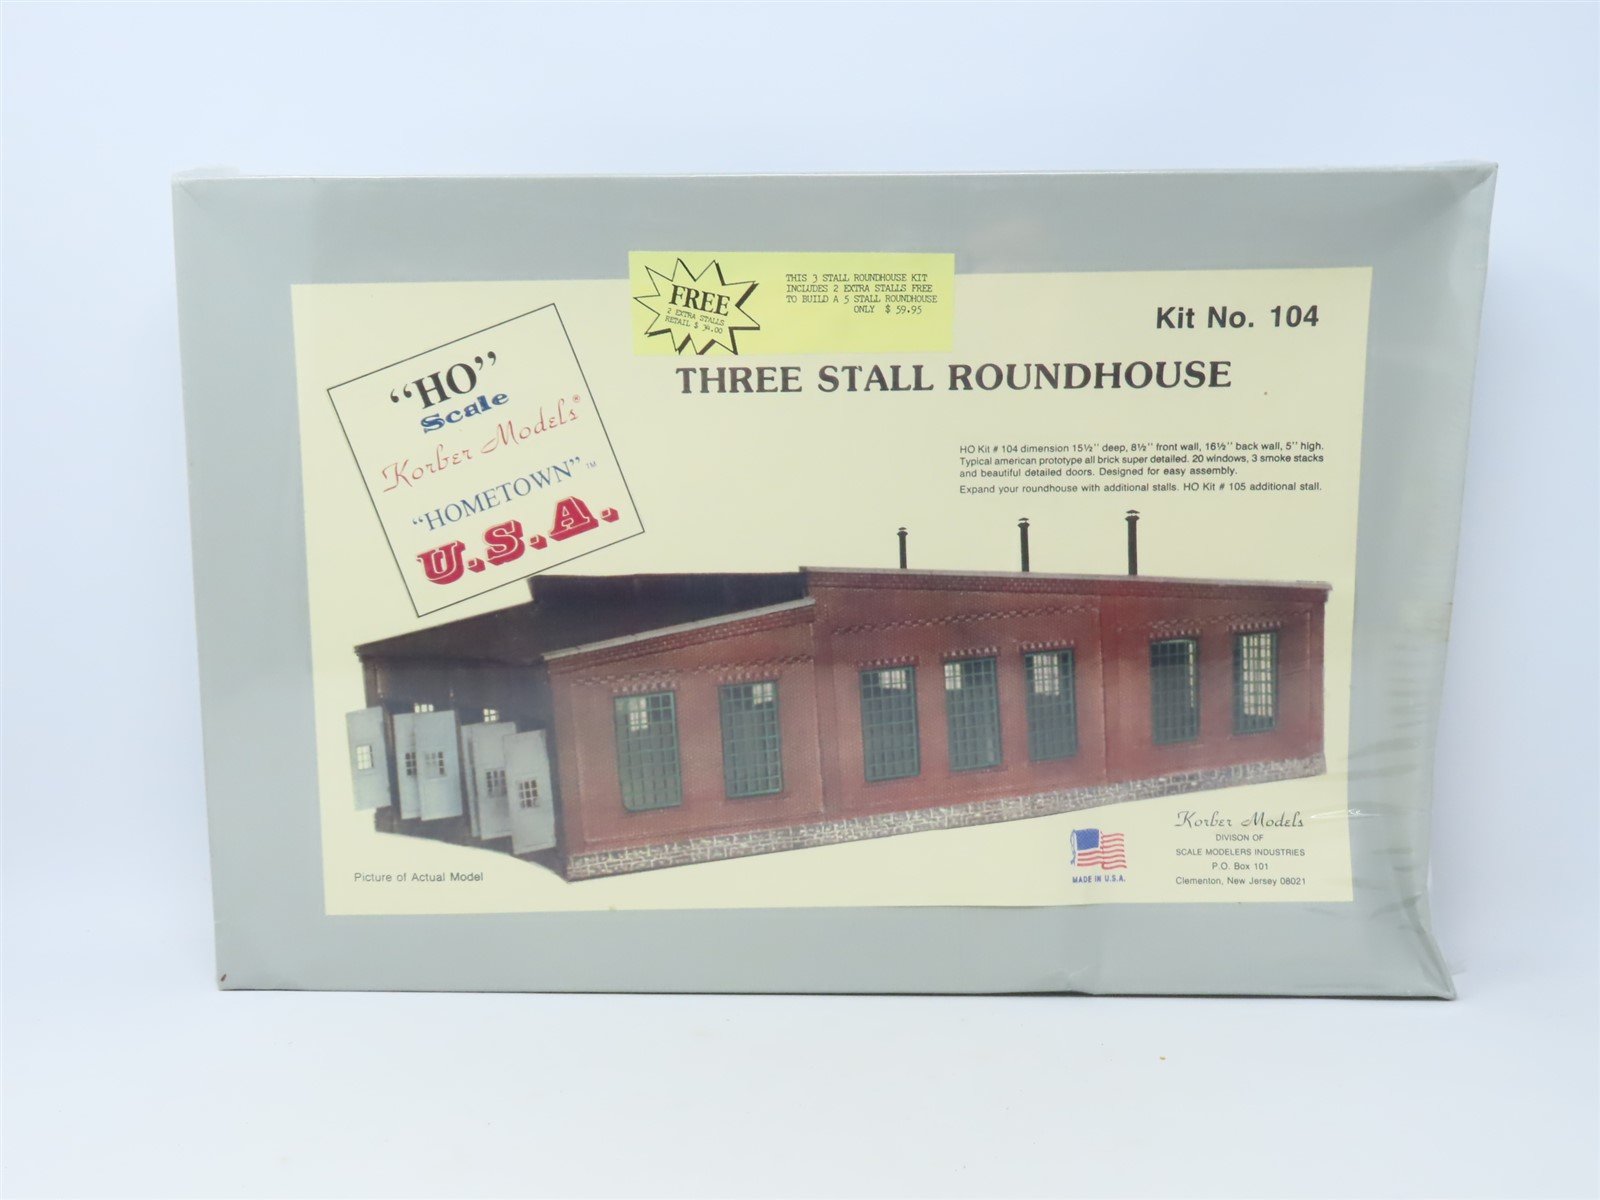 HO Scale Korber Models "Hometown USA" Kit #104 Three Stall Roundhouse - SEALED